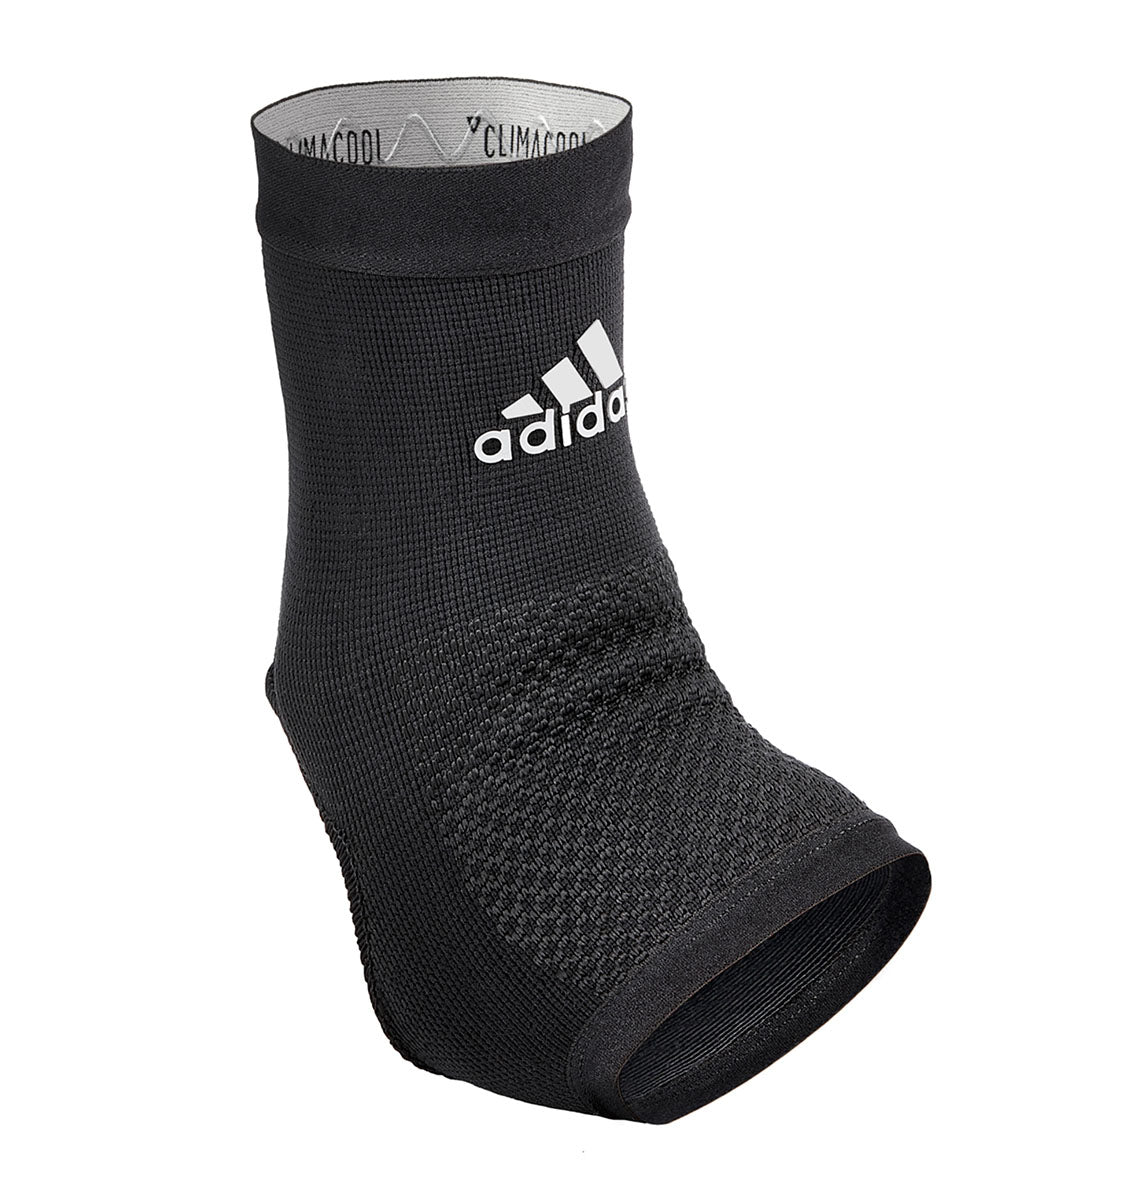 adidas Performance Climacool Ankle Support/Sleeve - Black - 1